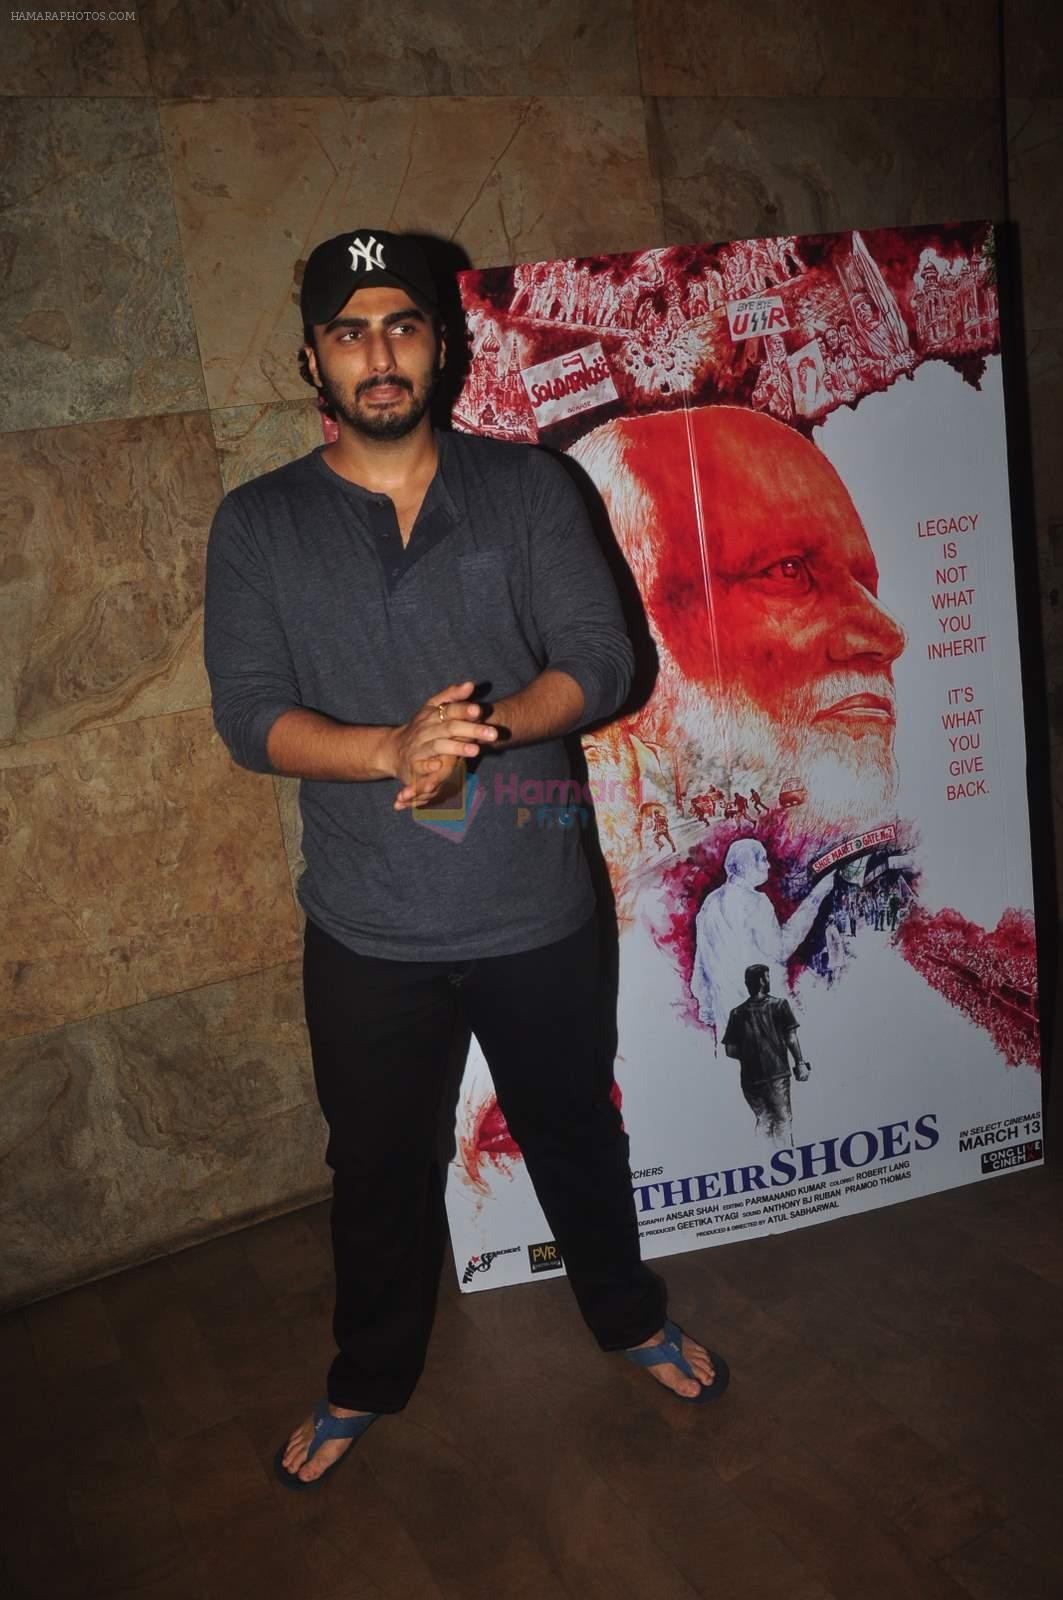 Arjun Kapoor at In Their shoes screening in Lightbox, Mumbai on 10th March 2015